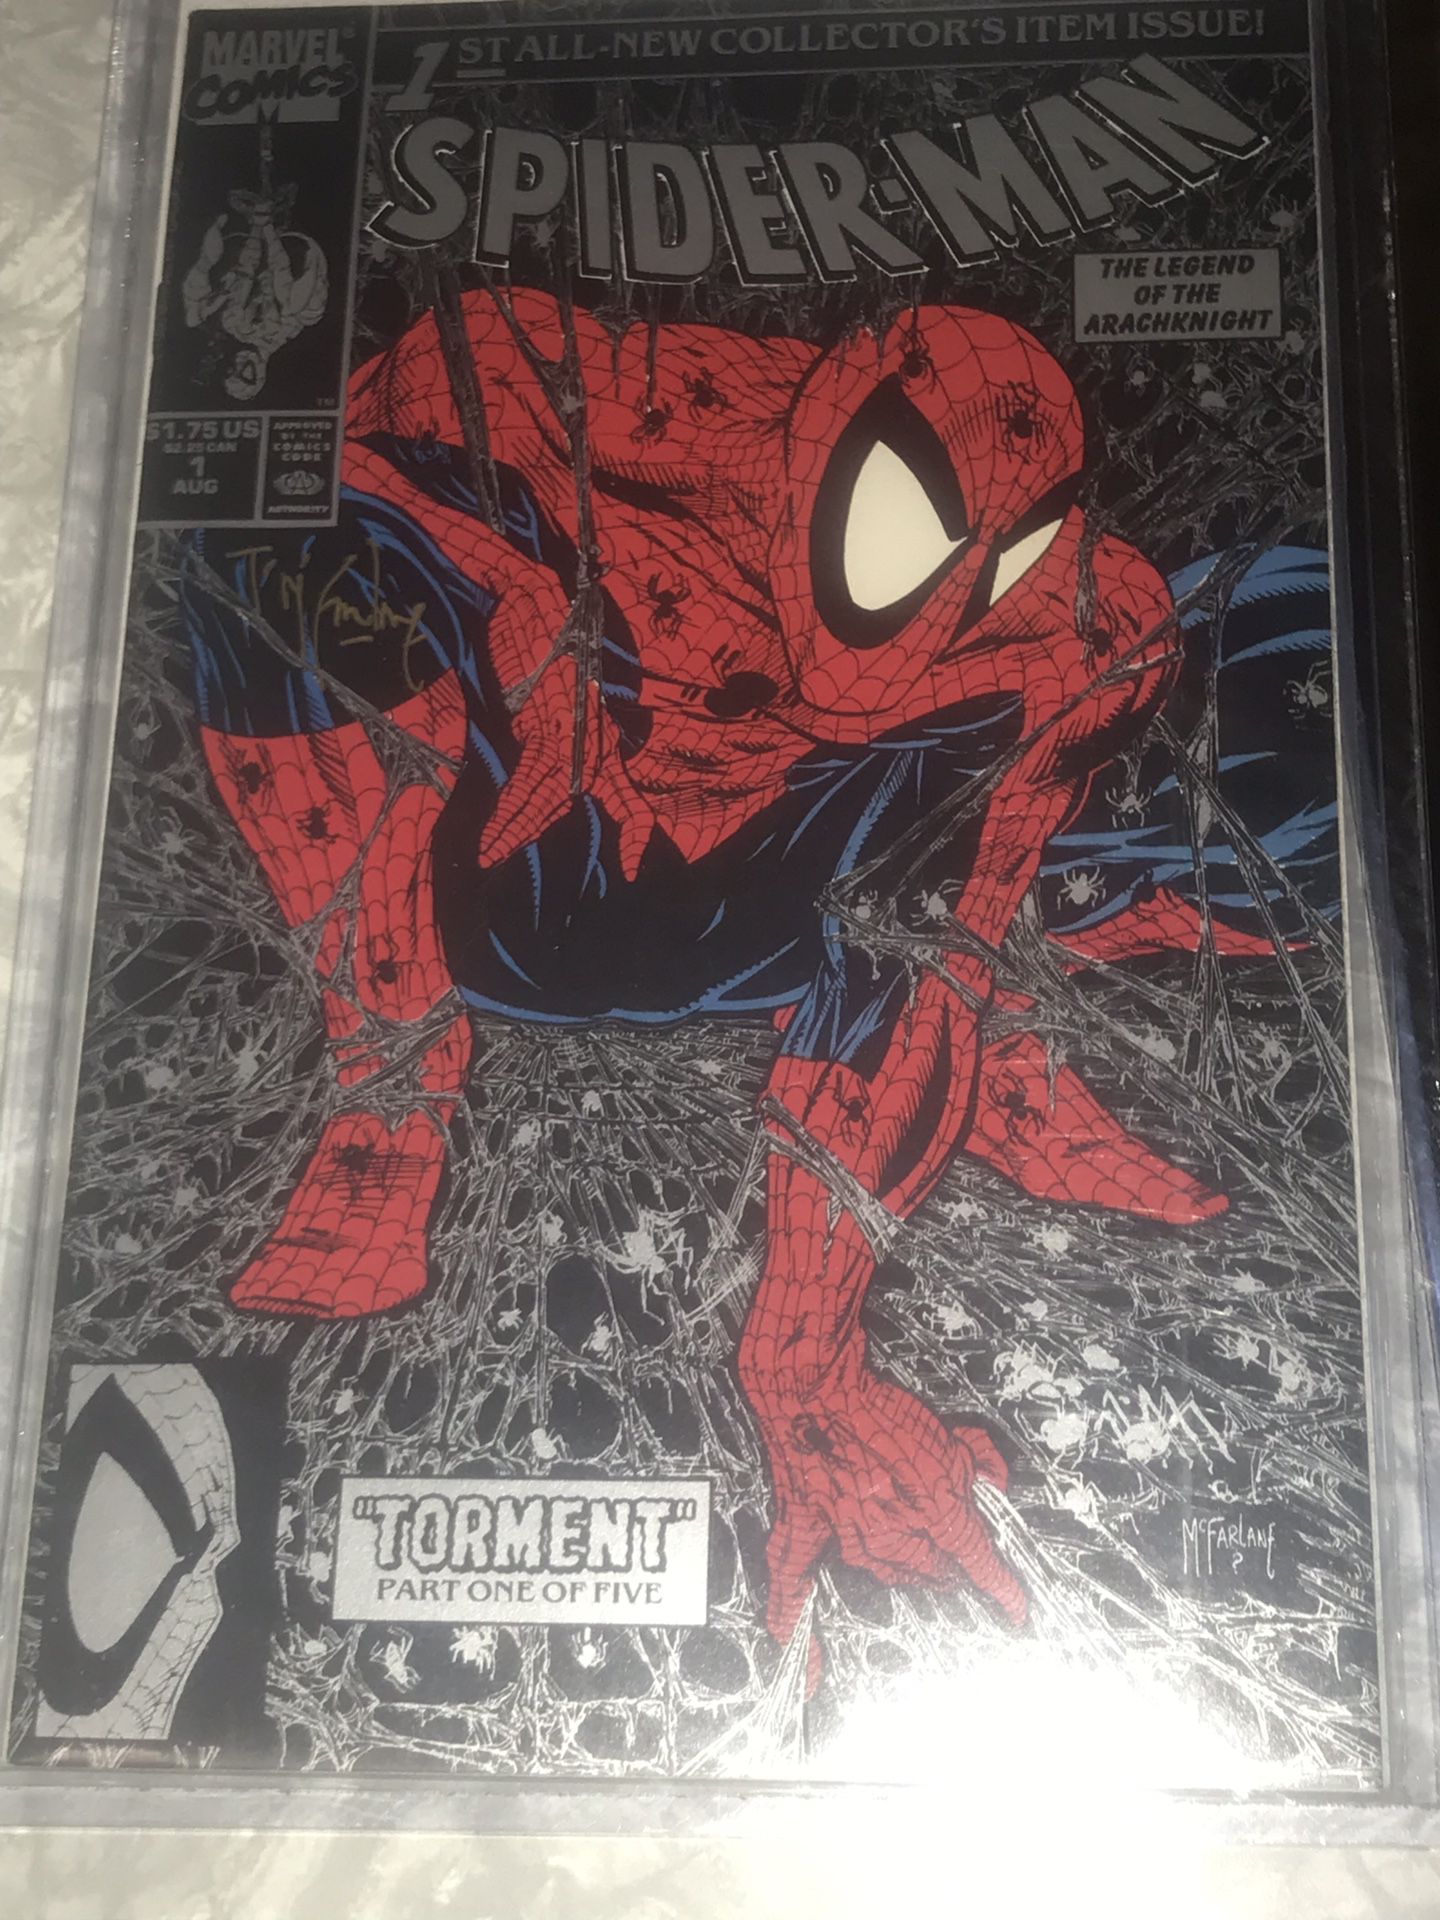 Todd Mcfarlanes Spider-Man #1 autographed